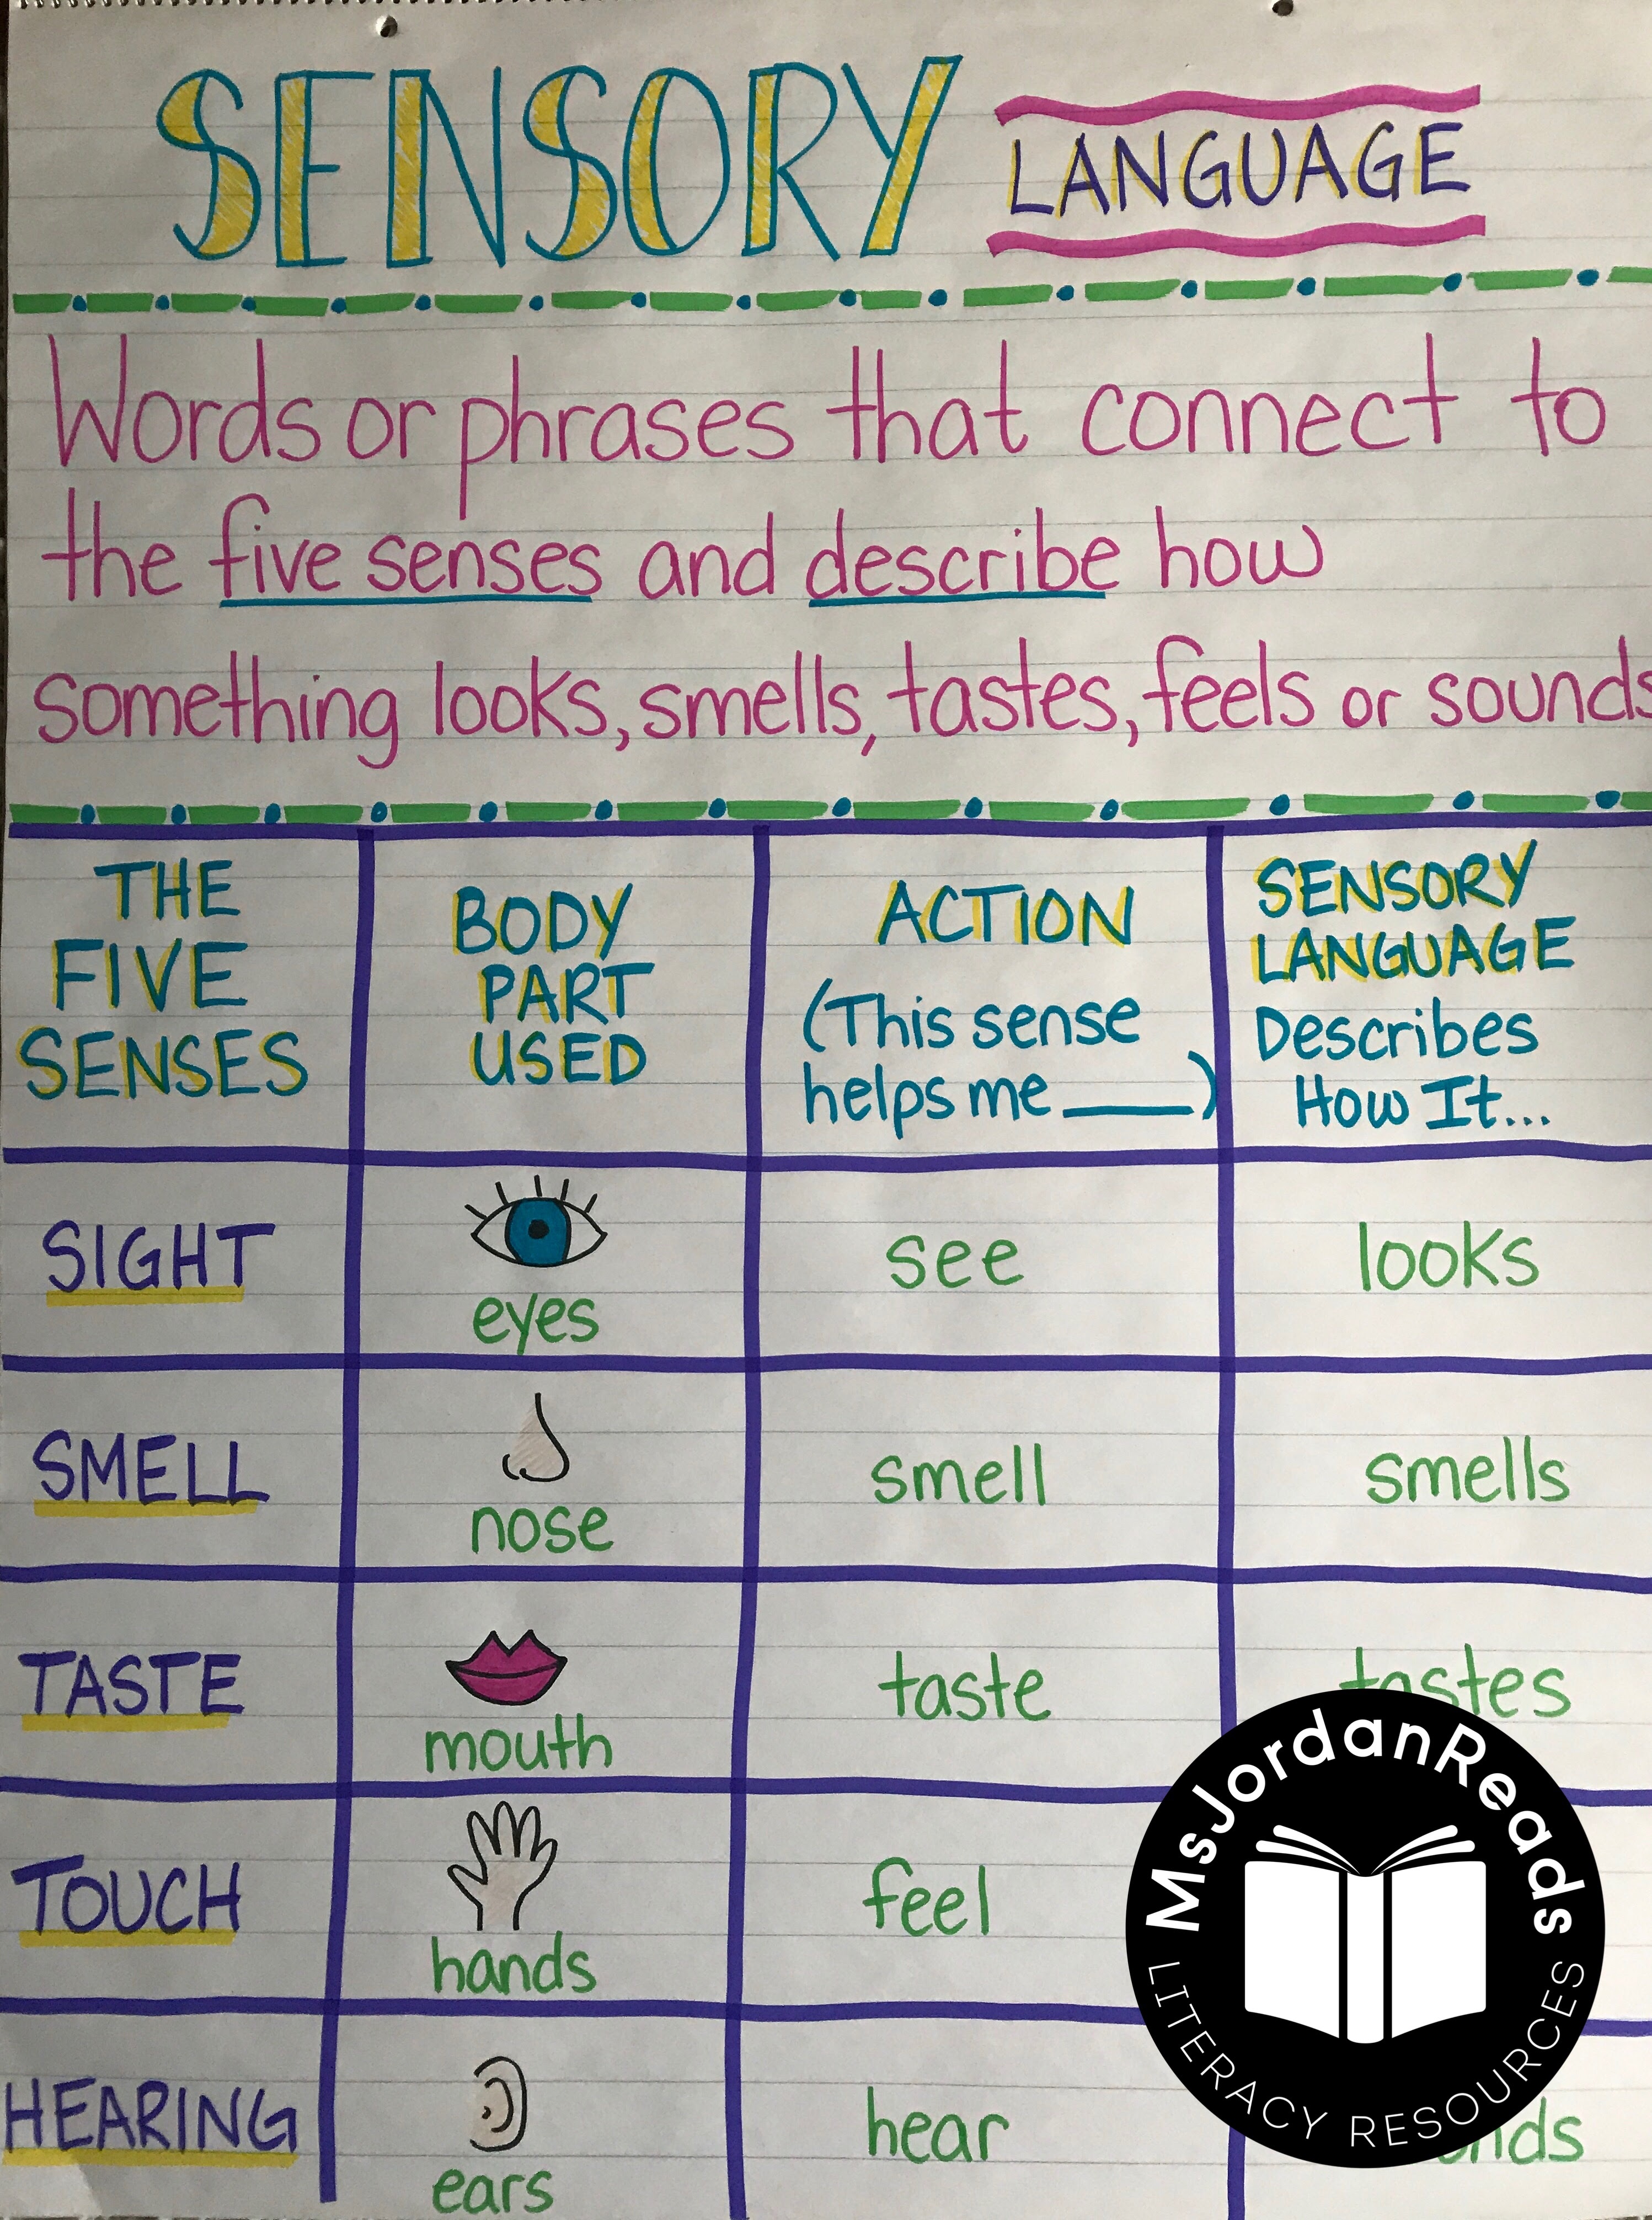 10-ideas-for-oral-sensory-seekers-in-the-classroom-ideas-provide-suggestions-to-help-with-self